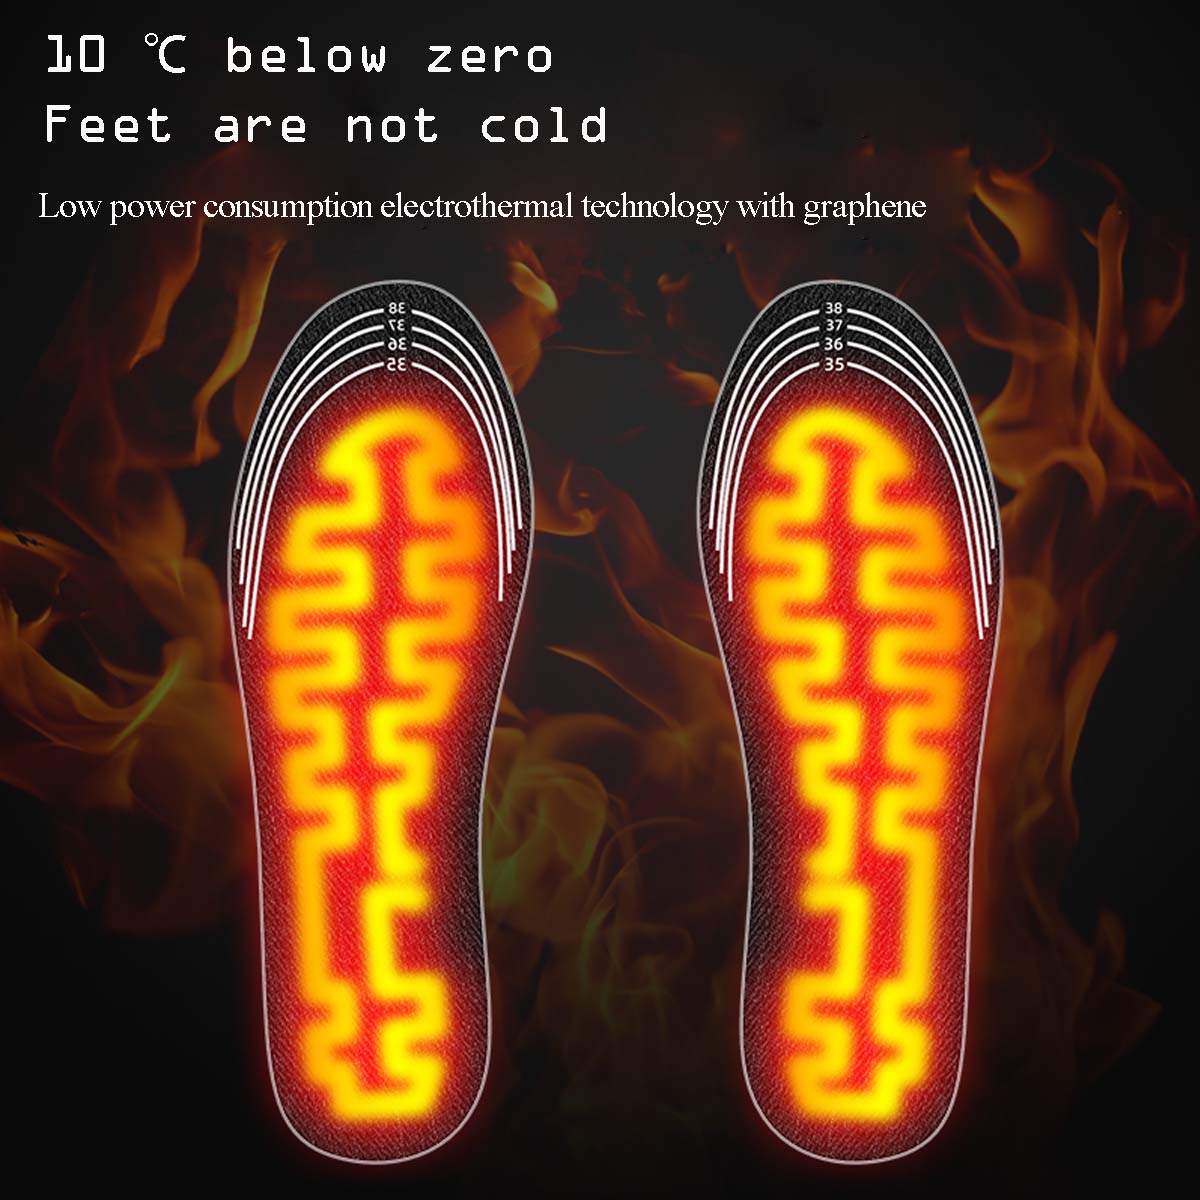 USB-Electric-Heated-Shoe-Insoles-Electric-Film-Feet-Heater-Outdoor-Warm-Socks-Pads-Winter-Sports-Acc-1809982-2